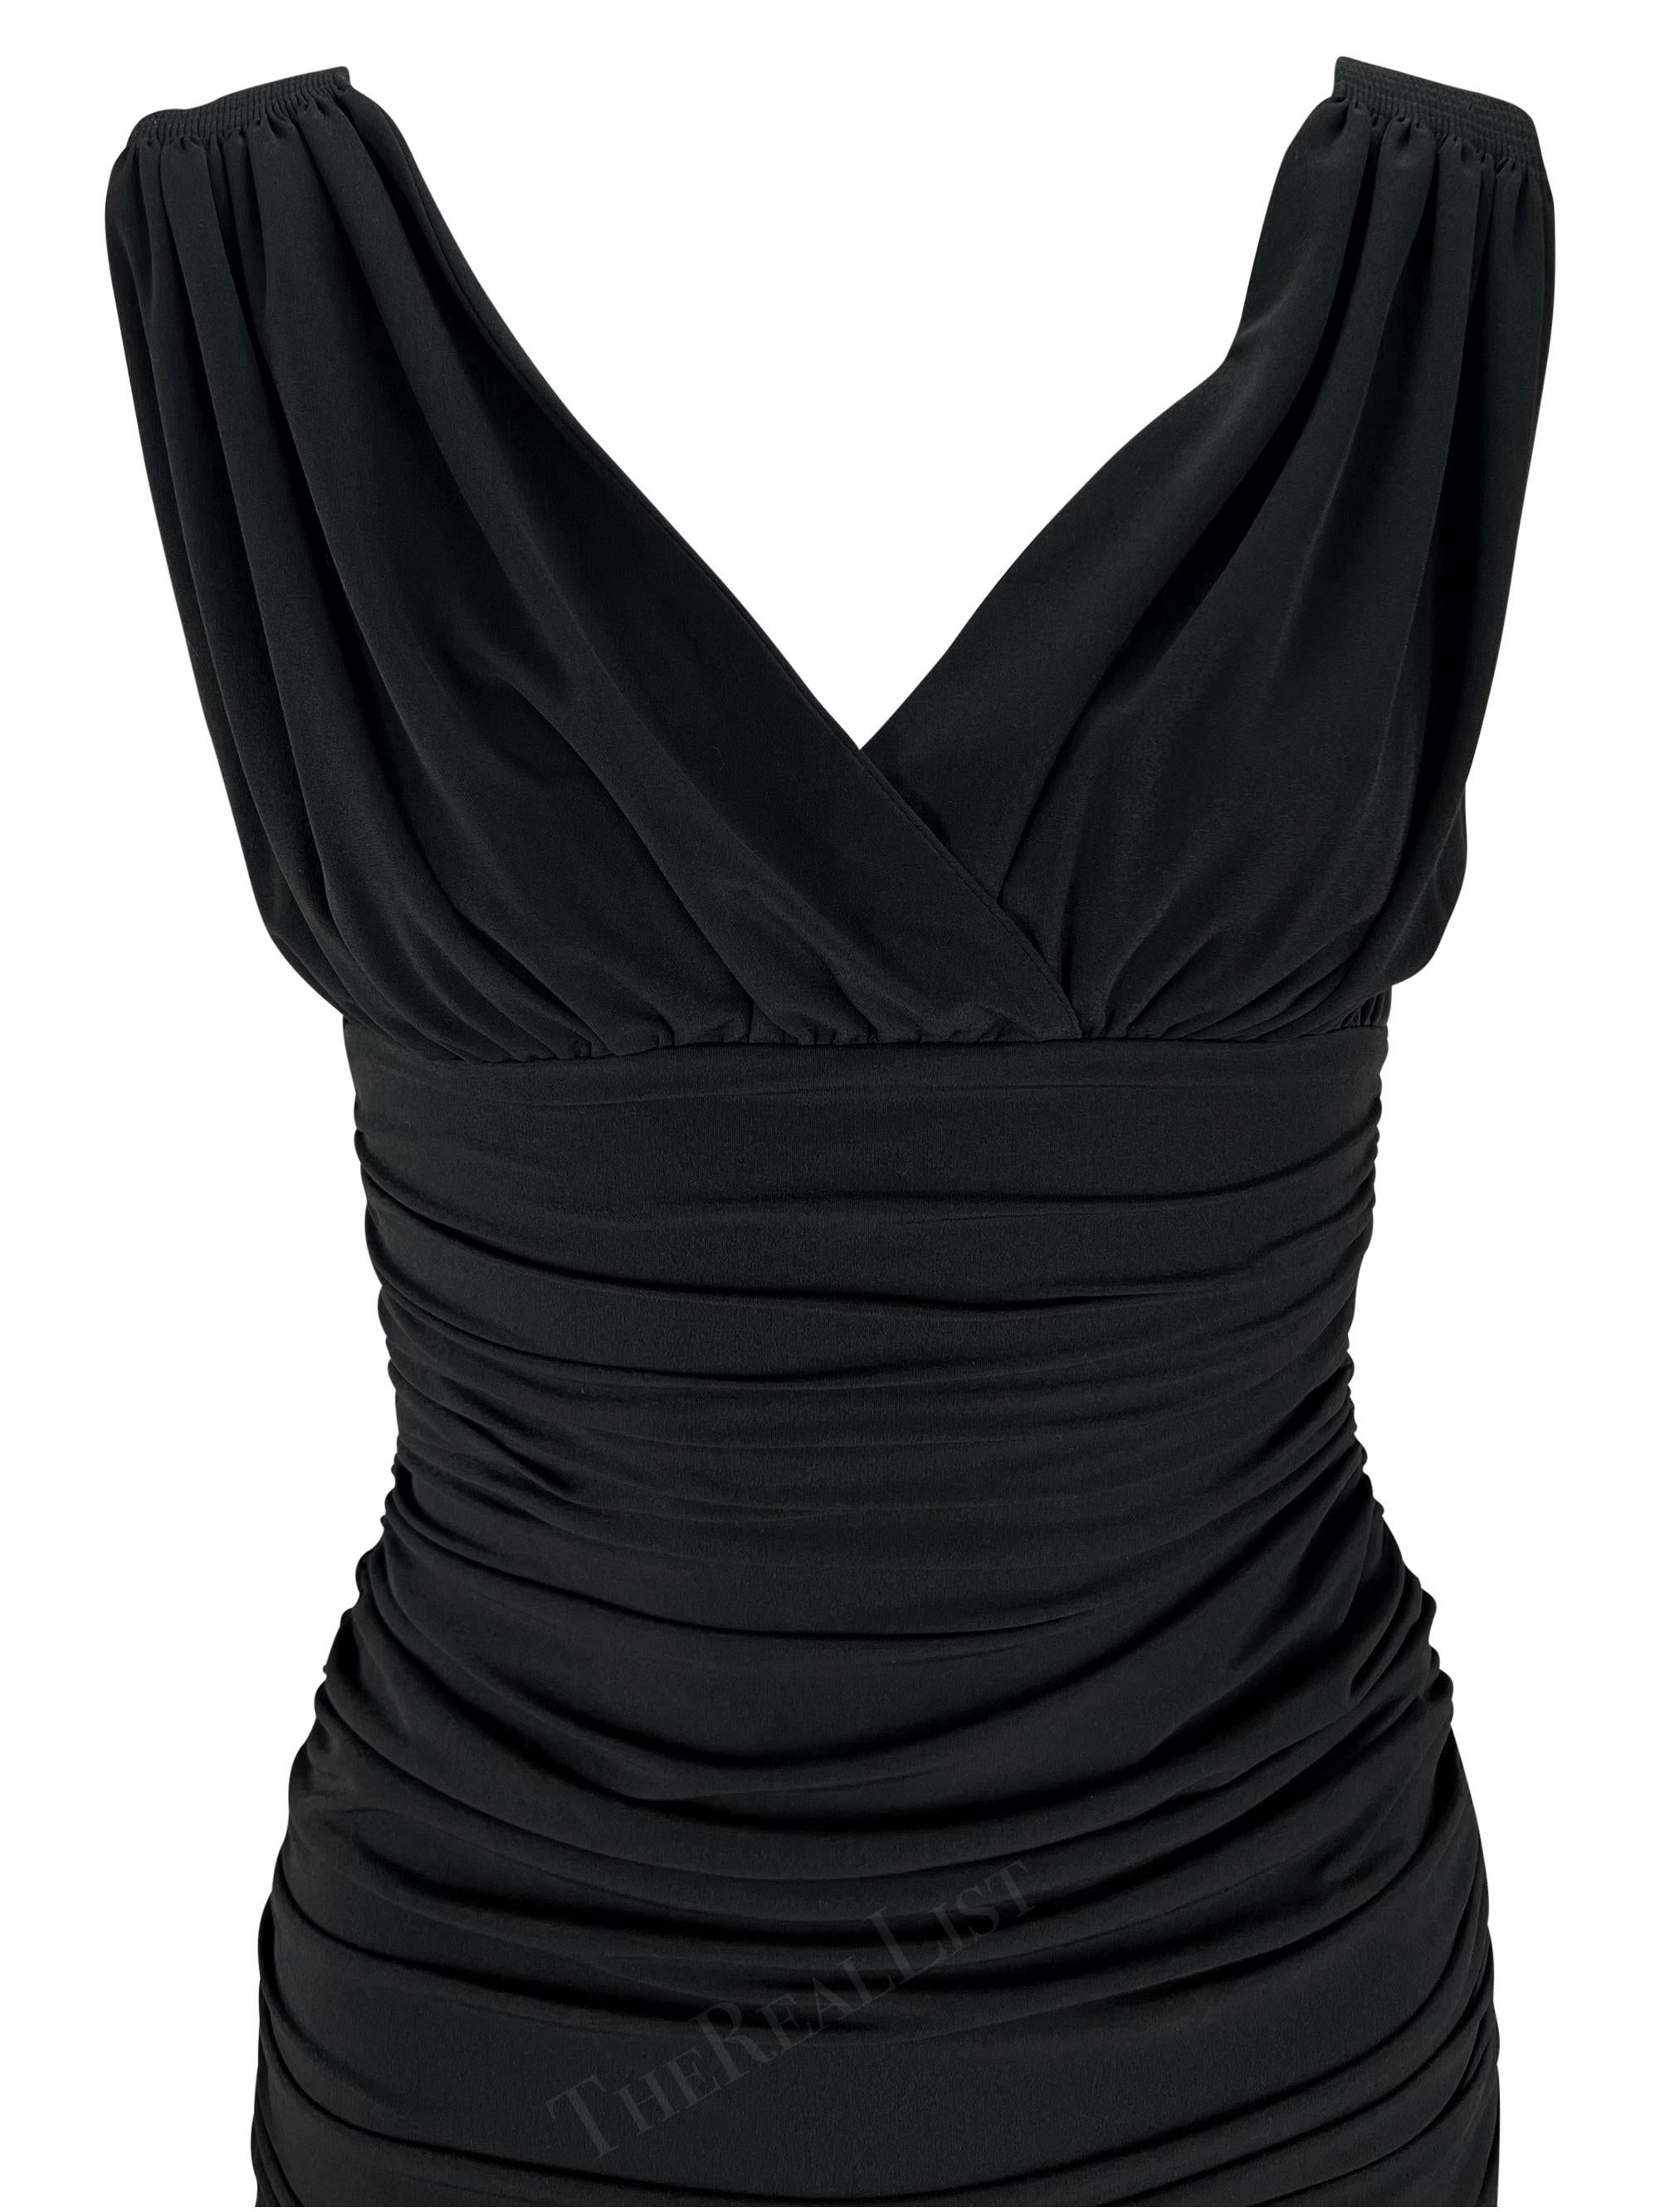 Presenting a stunning black Norma Kamali slinky gown. From the 1990s, this off-the-shoulder wiggle gown is covered in stretchy ruching throughout. Sleek, sexy, and form-fitting this Norma Kamali ankle-length gown features a v-neckline is the perfect